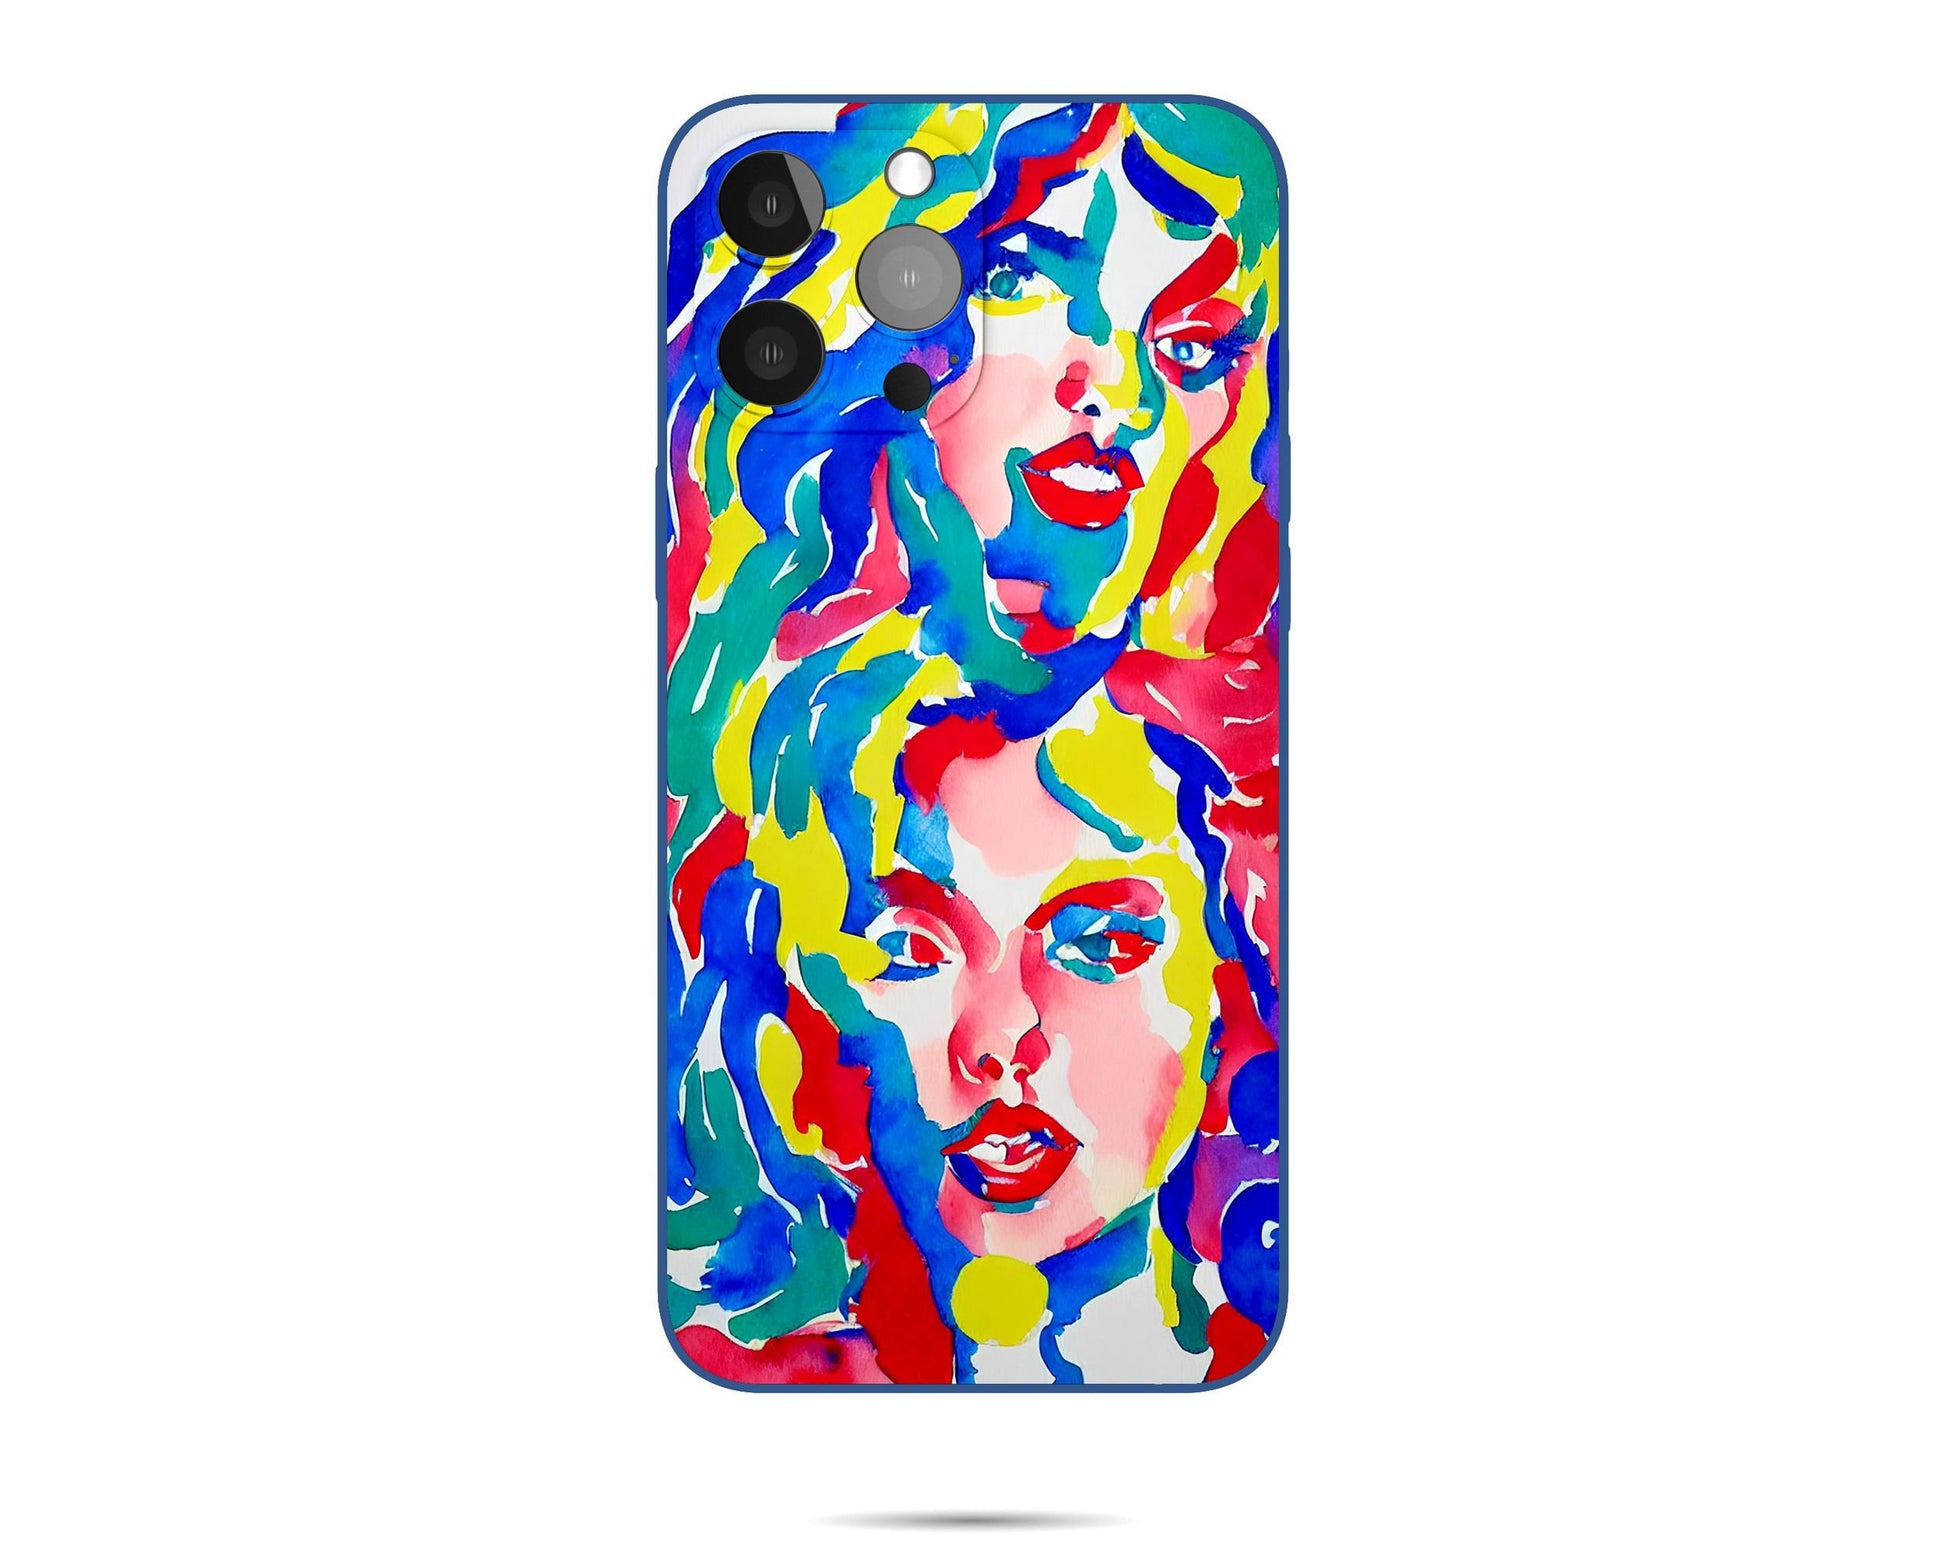 George Miller Original Watercolor Art Taylor Swift Iphone Cover, Iphone 11 Pro Max, Iphone Xr Case, Iphone 8 Plus Case Art, Gift For Her